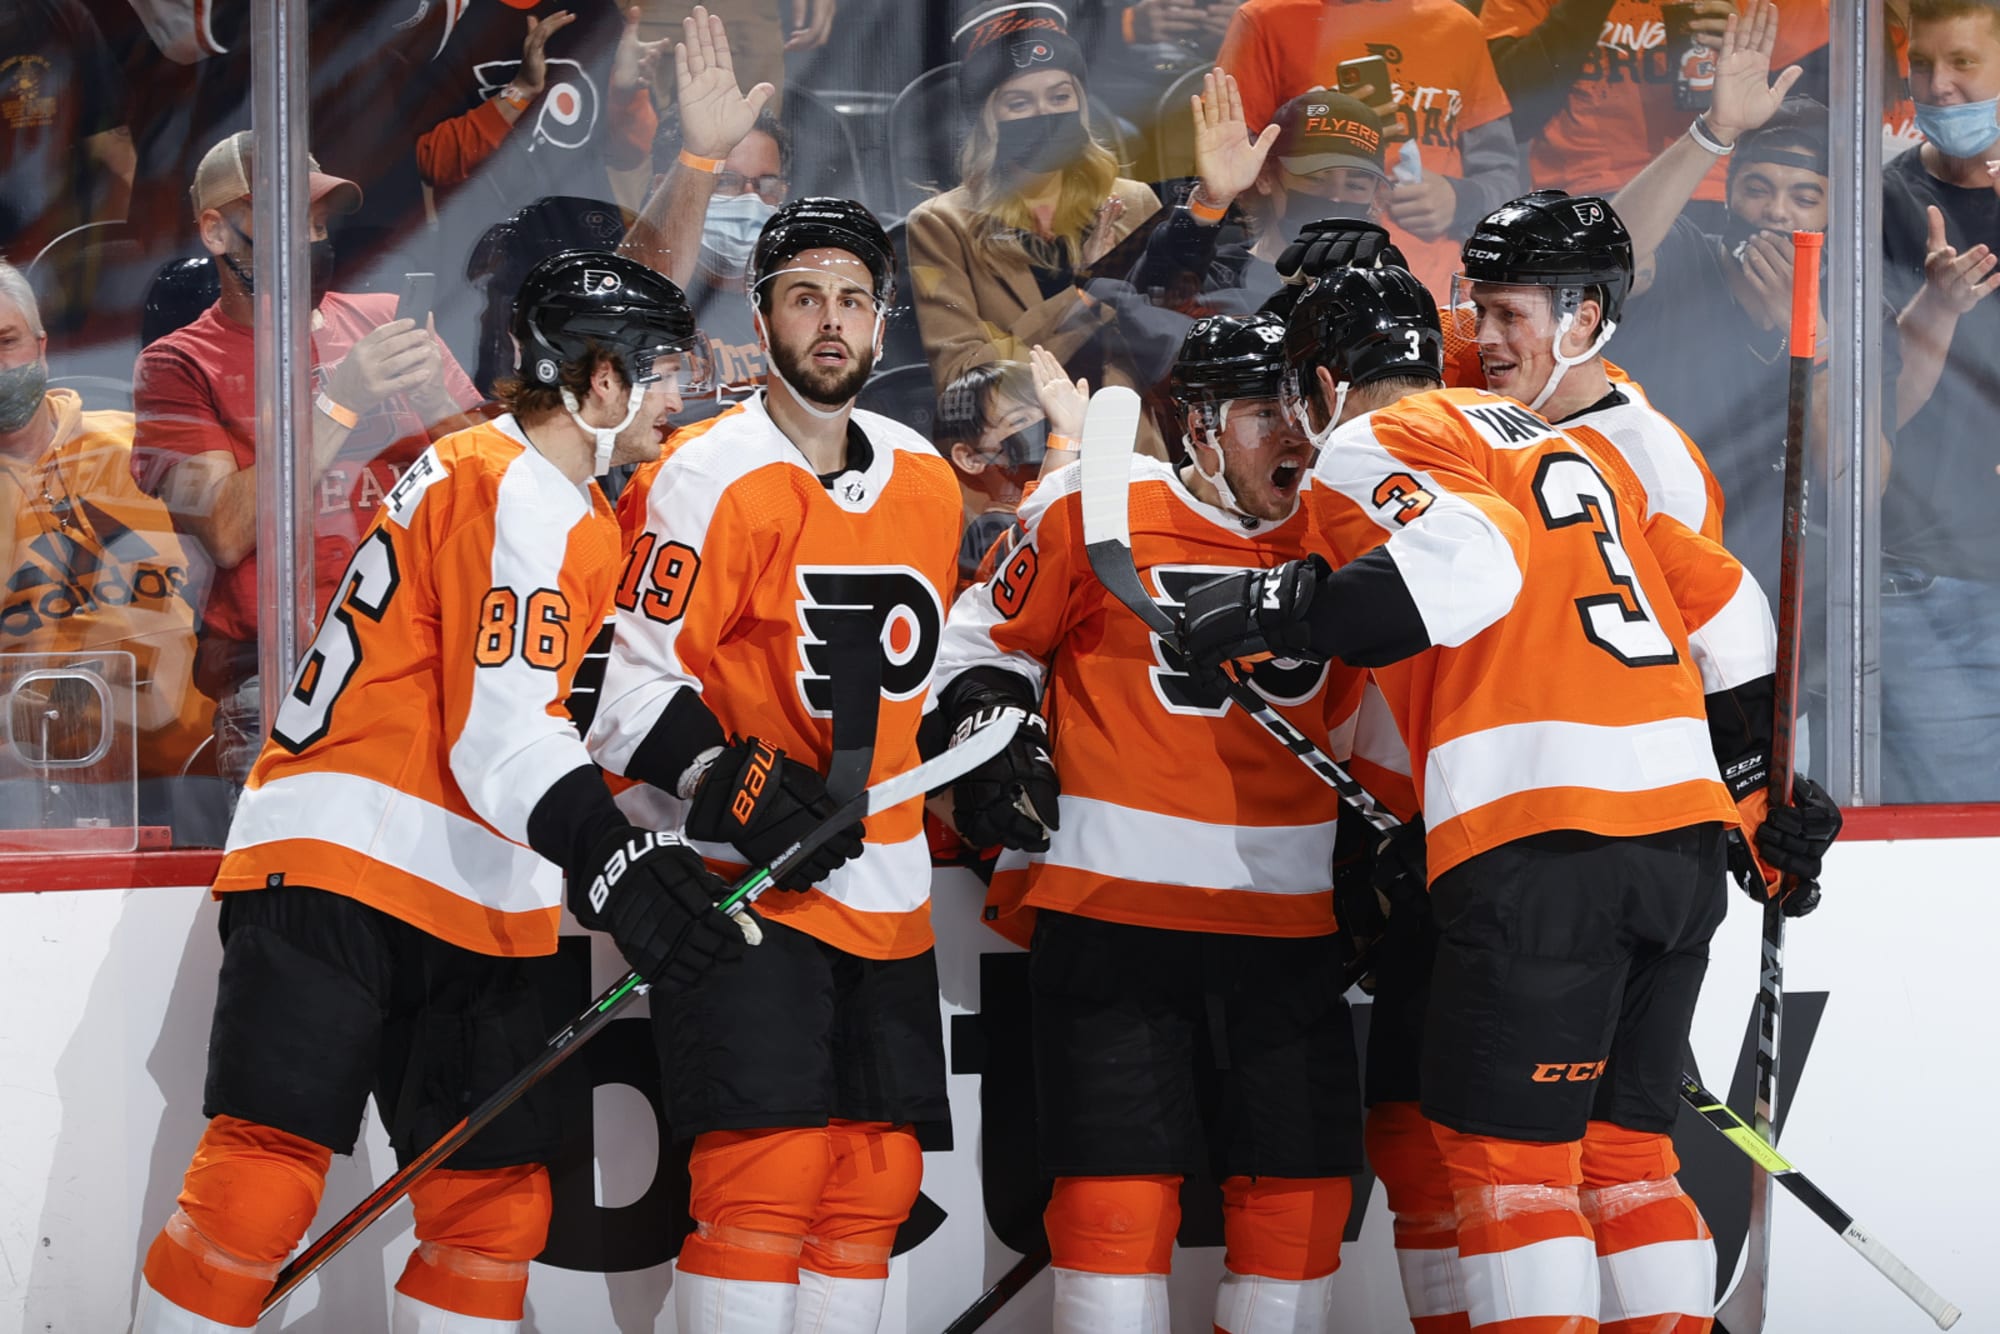 Philadelphia Flyers: Critical week at home on tap already